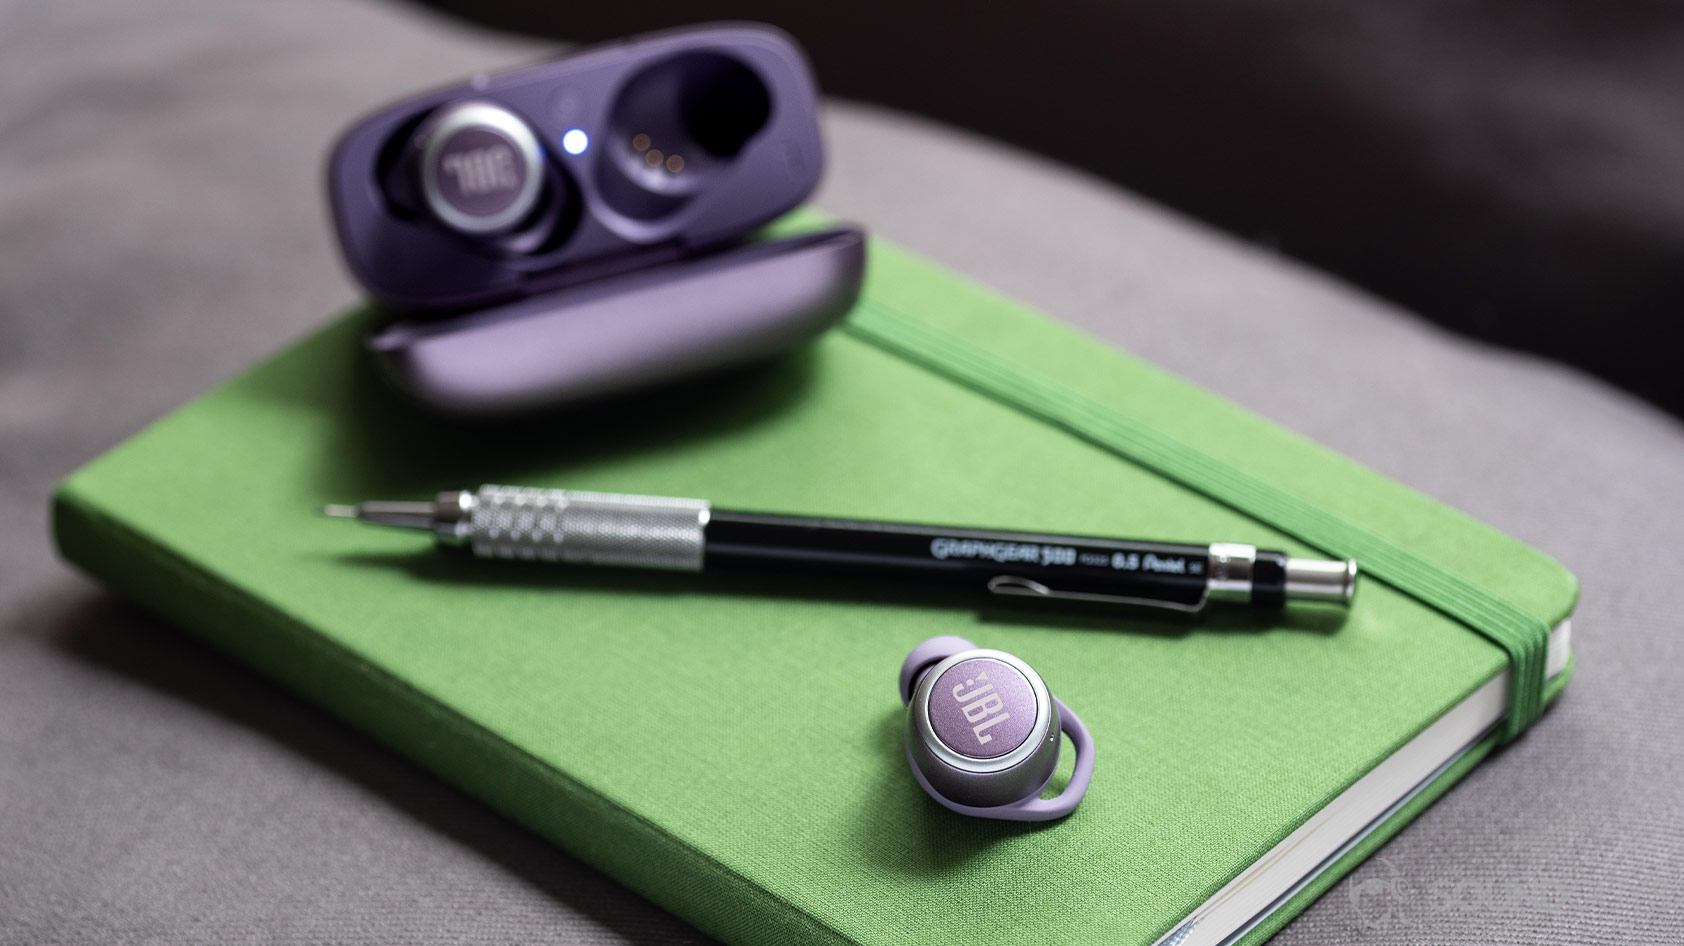 The JBL LIVE 300 TWS true wireless earbuds on a green journal next to a mechanical pencil with the open charging case in the background.